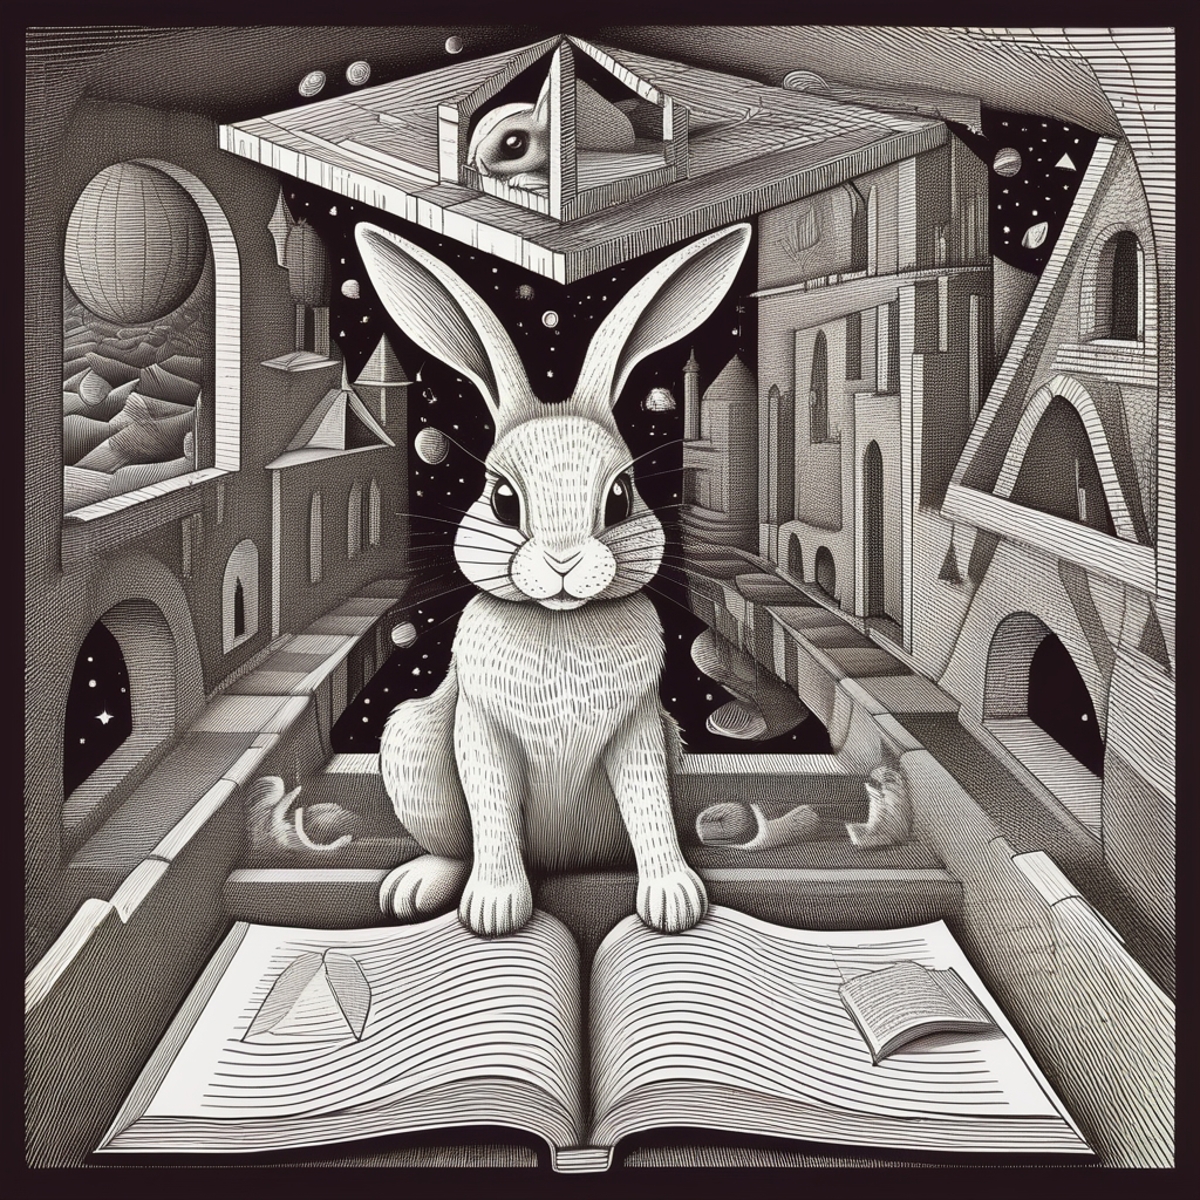 A white rabbit sits on top of an open book in a surreal scene.